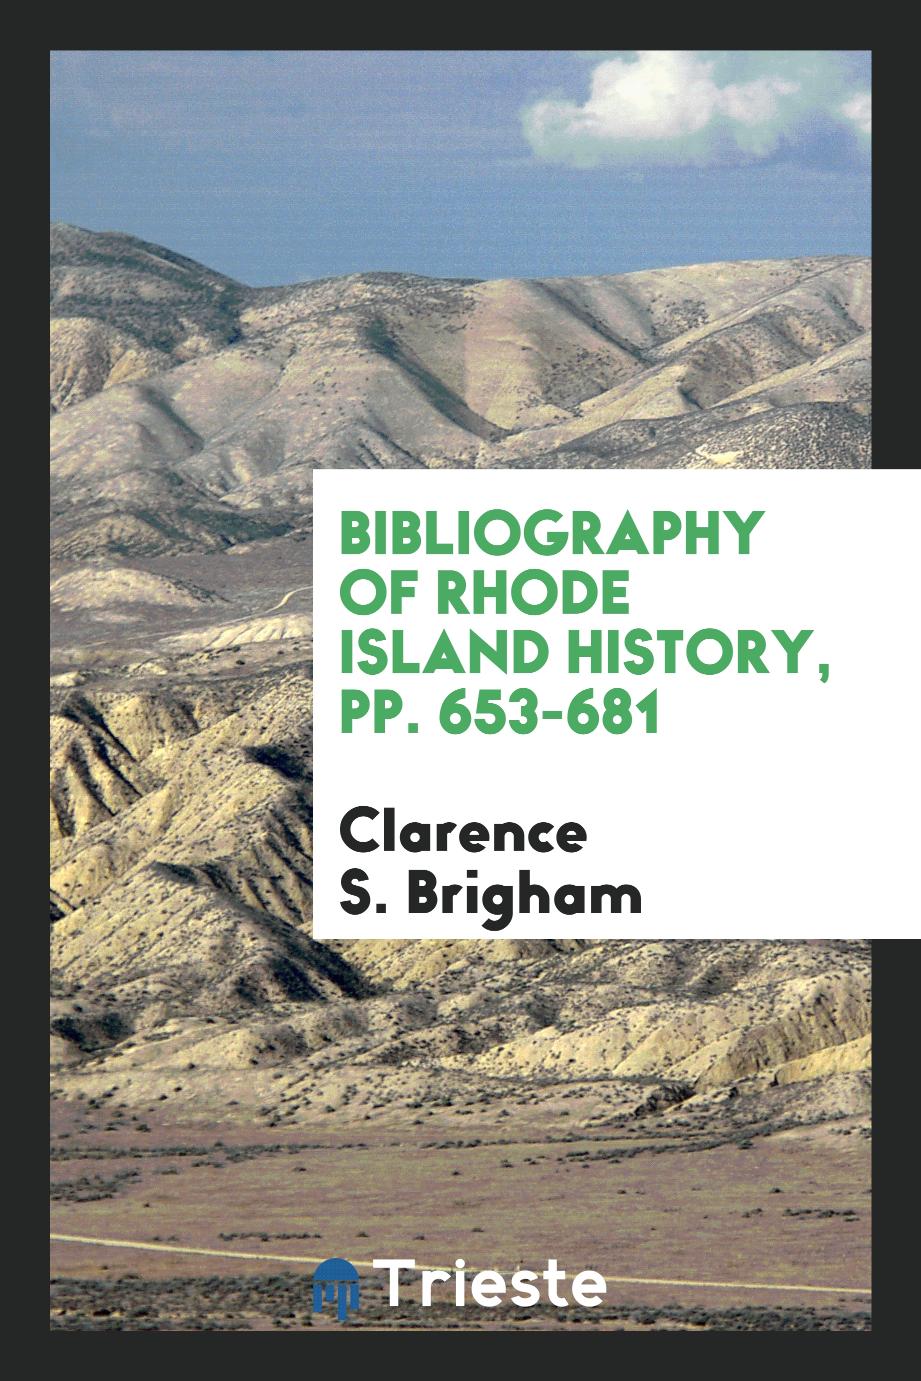 Bibliography of Rhode Island History, pp. 653-681